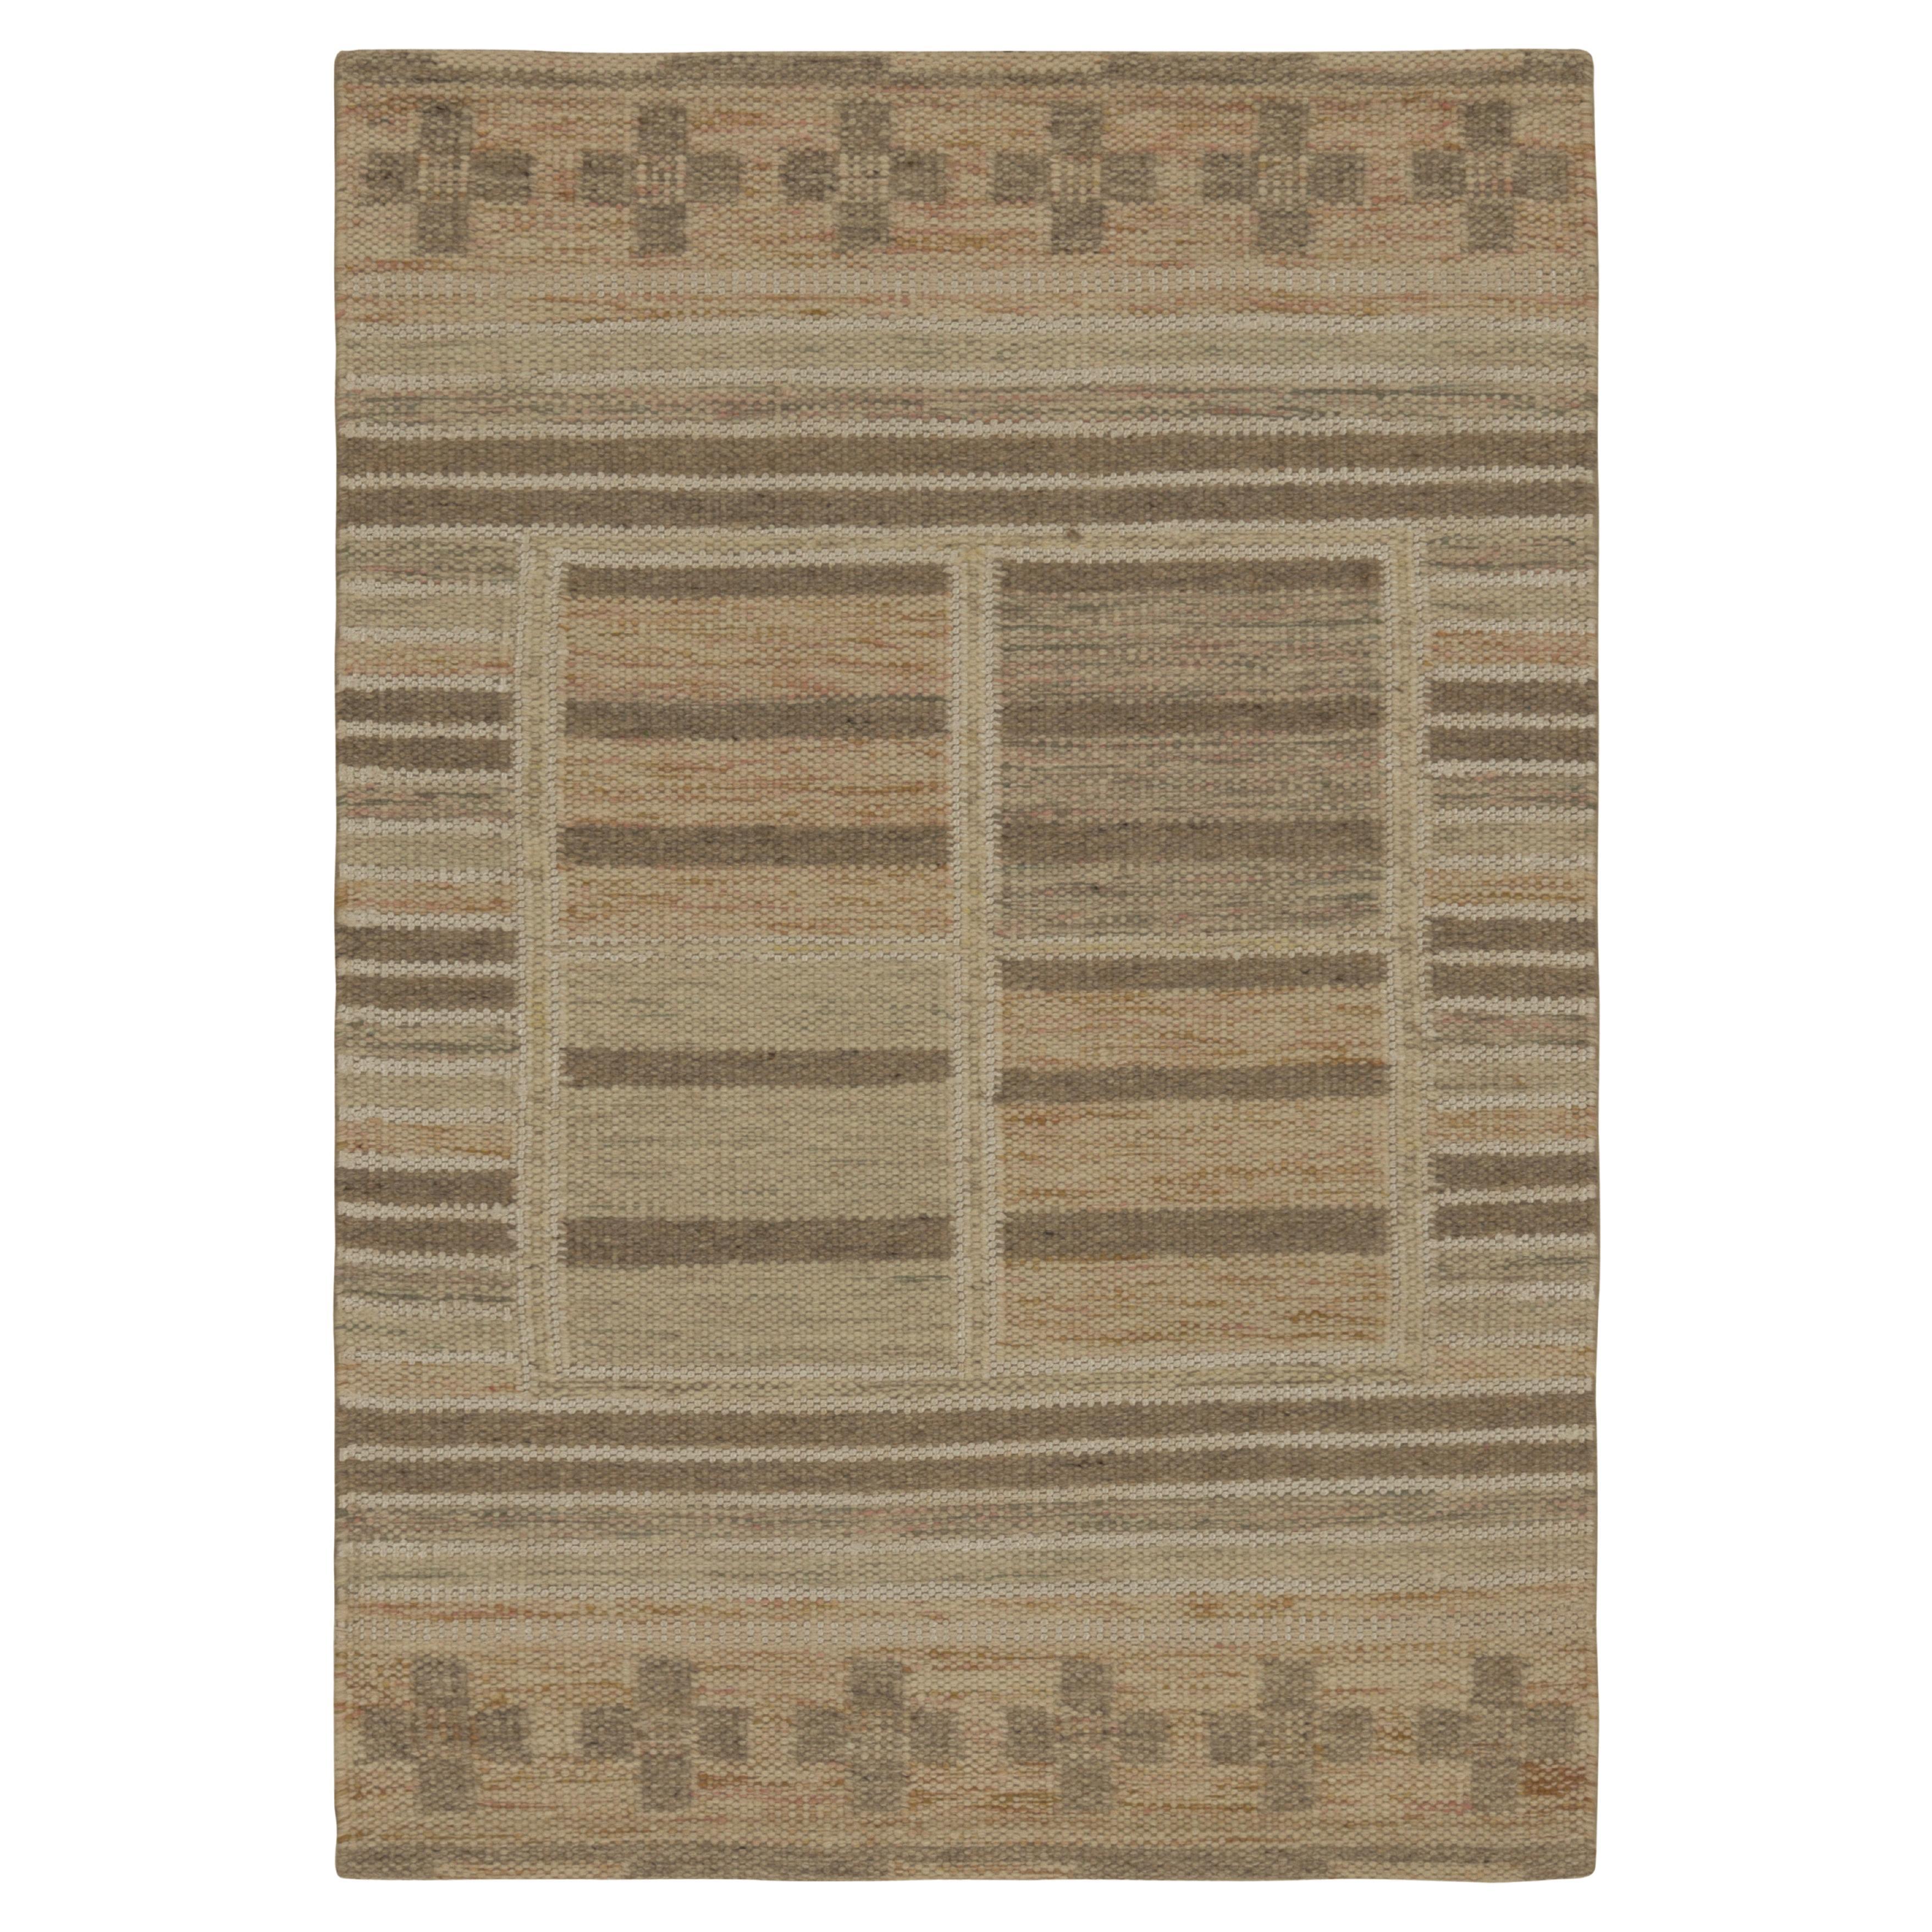 Rug & Kilim’s Scandinavian Style Rug in Beige, with Colorful Geometric Patterns For Sale